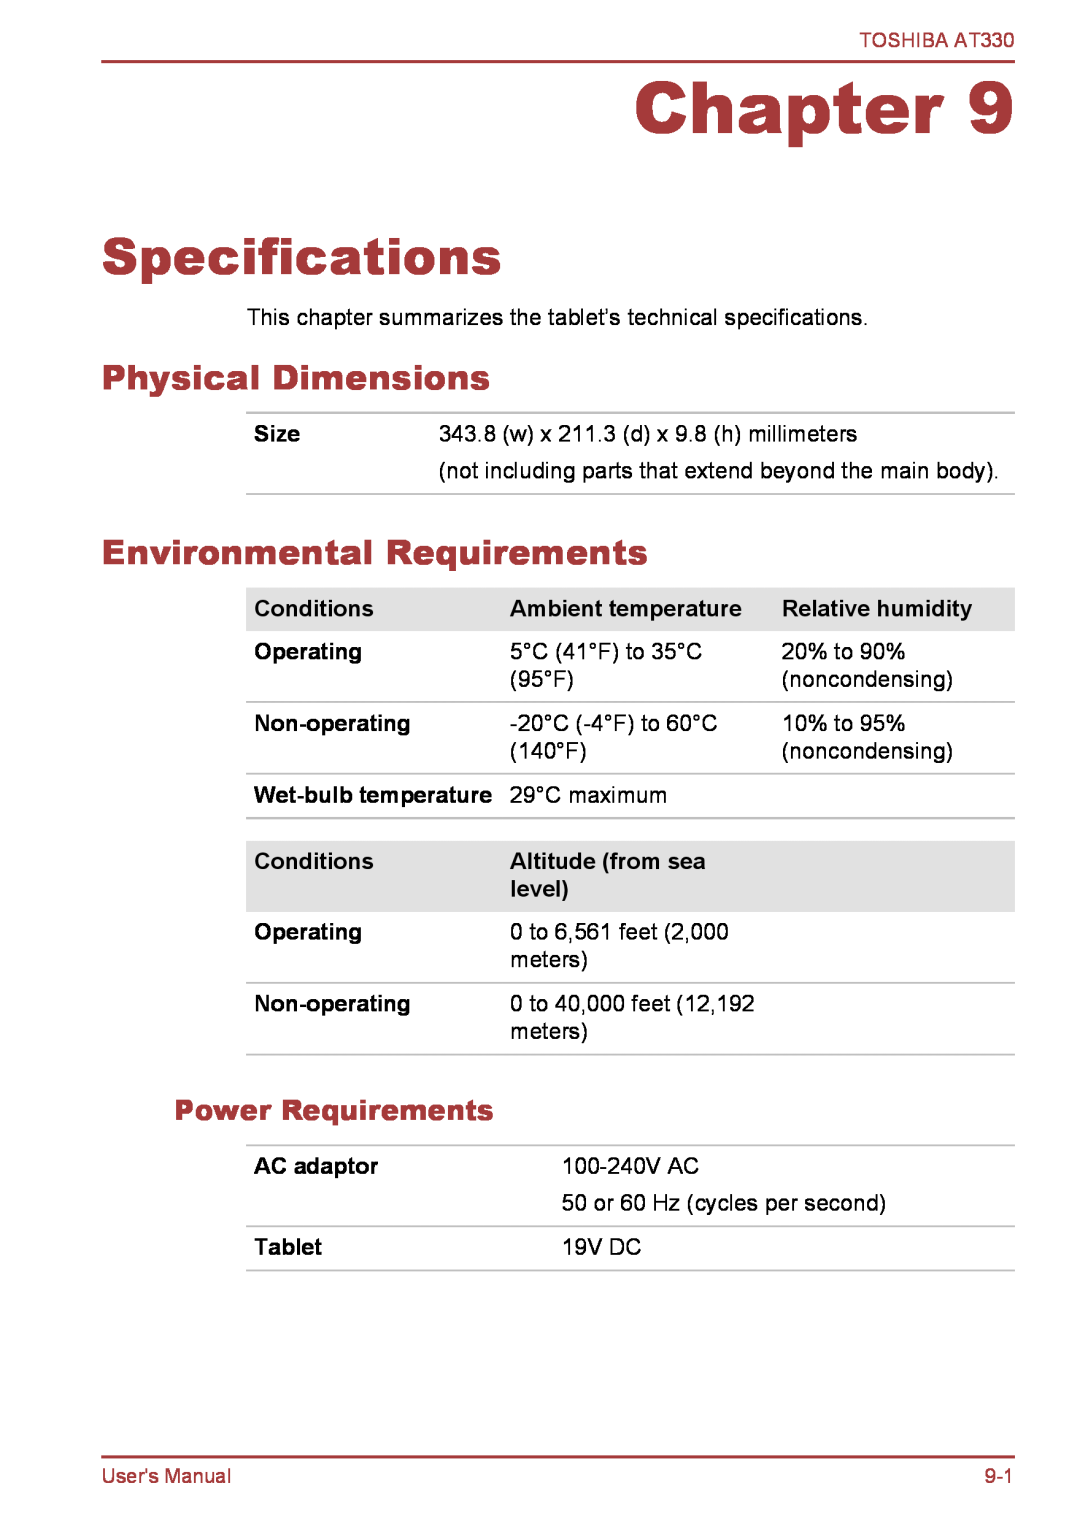 Toshiba at330 Specifications, Physical Dimensions, Environmental Requirements, Power Requirements, Size, Conditions, level 